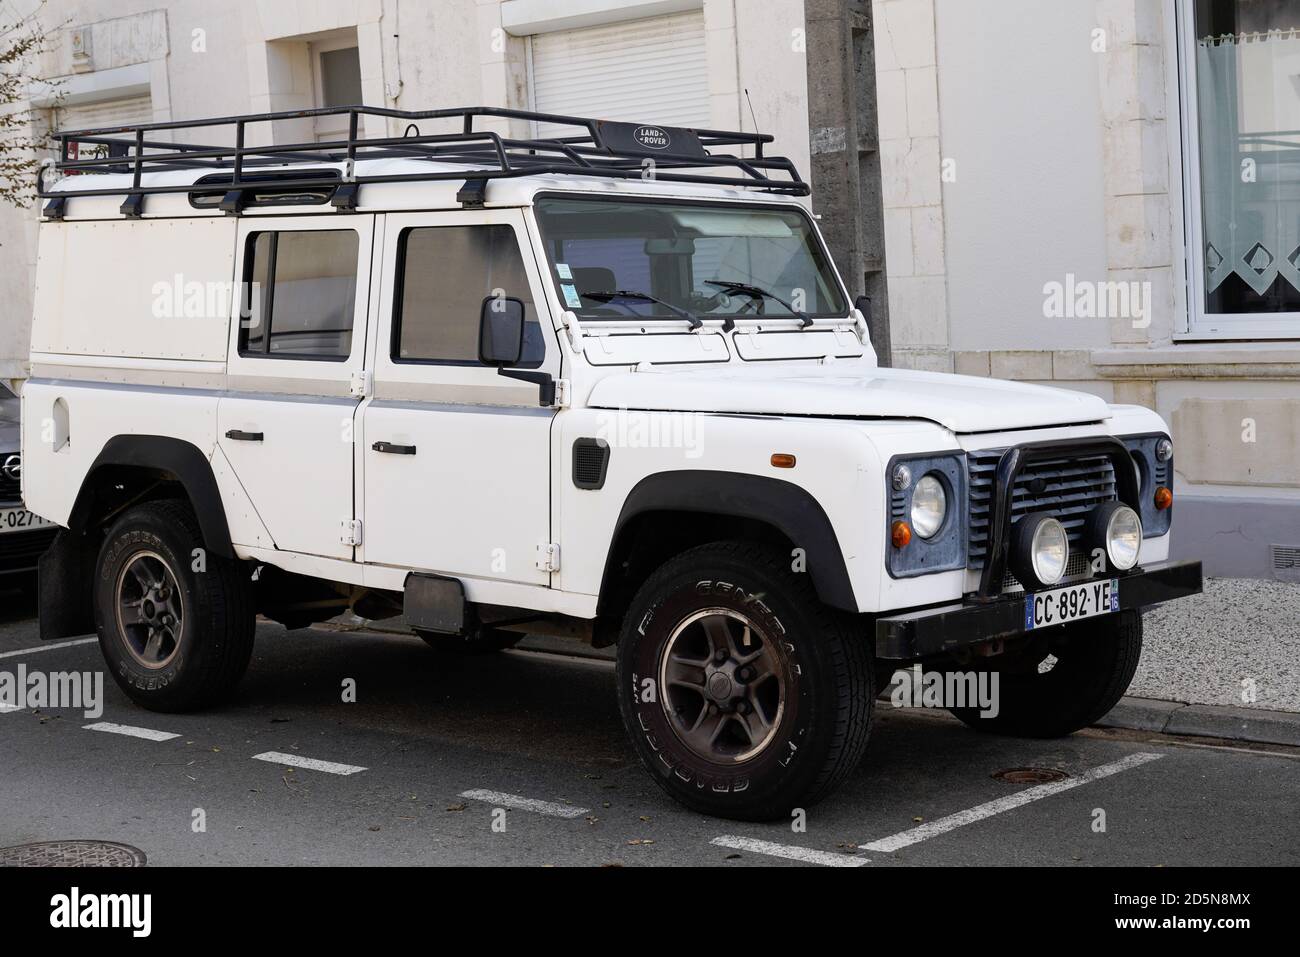 Bordeaux , Aquitaine / France - 10 01 2020 : Land Rover Defender white car  iconic British off road vehicle historical and vintage Stock Photo - Alamy